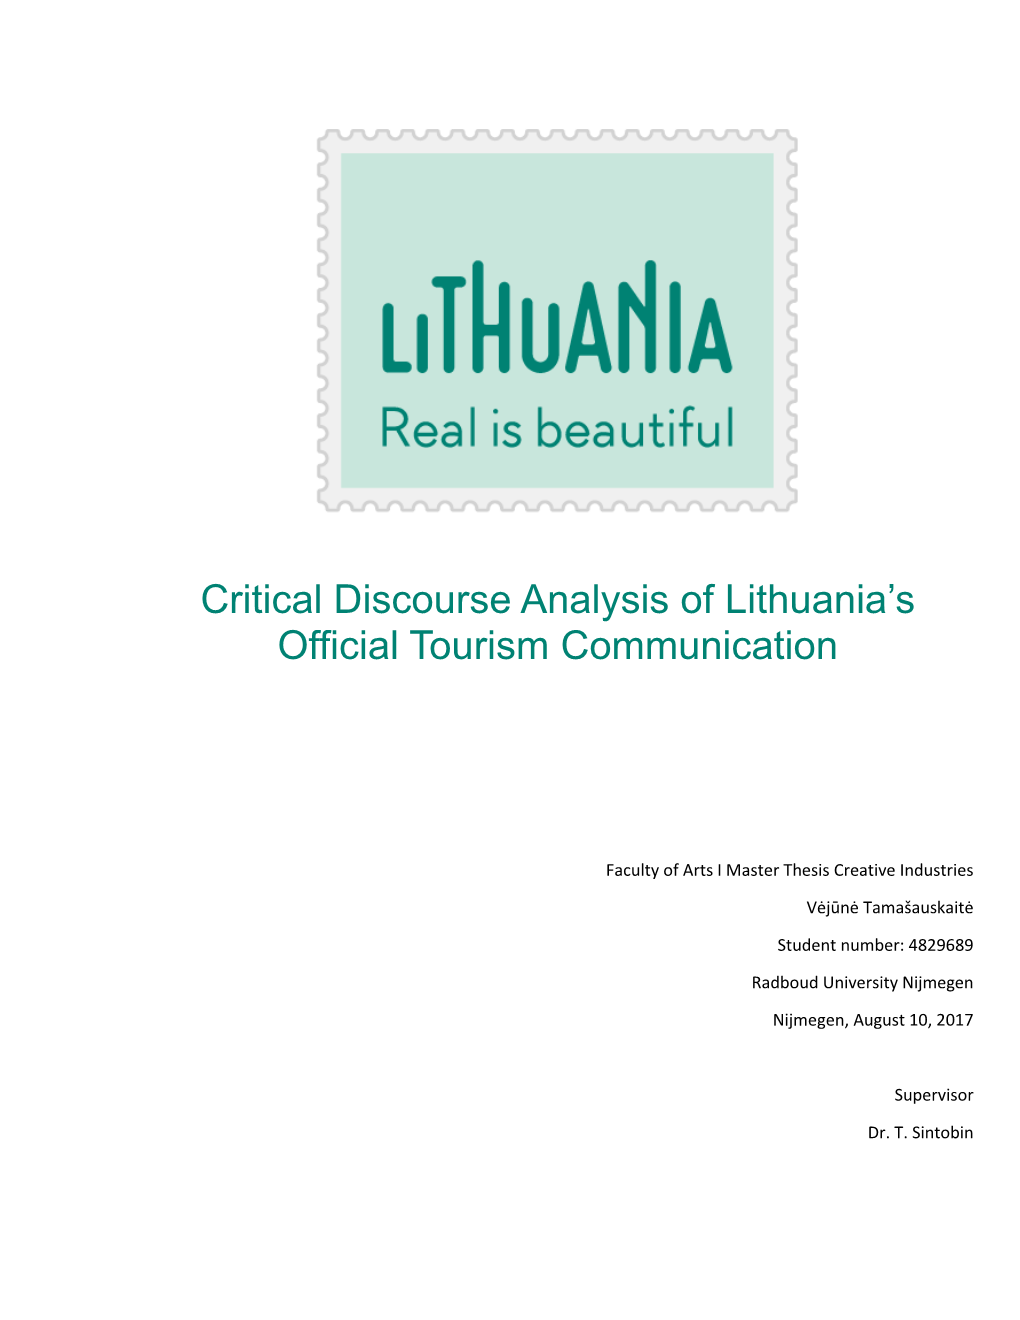 Critical Discourse Analysis of Lithuania's Official Tourism